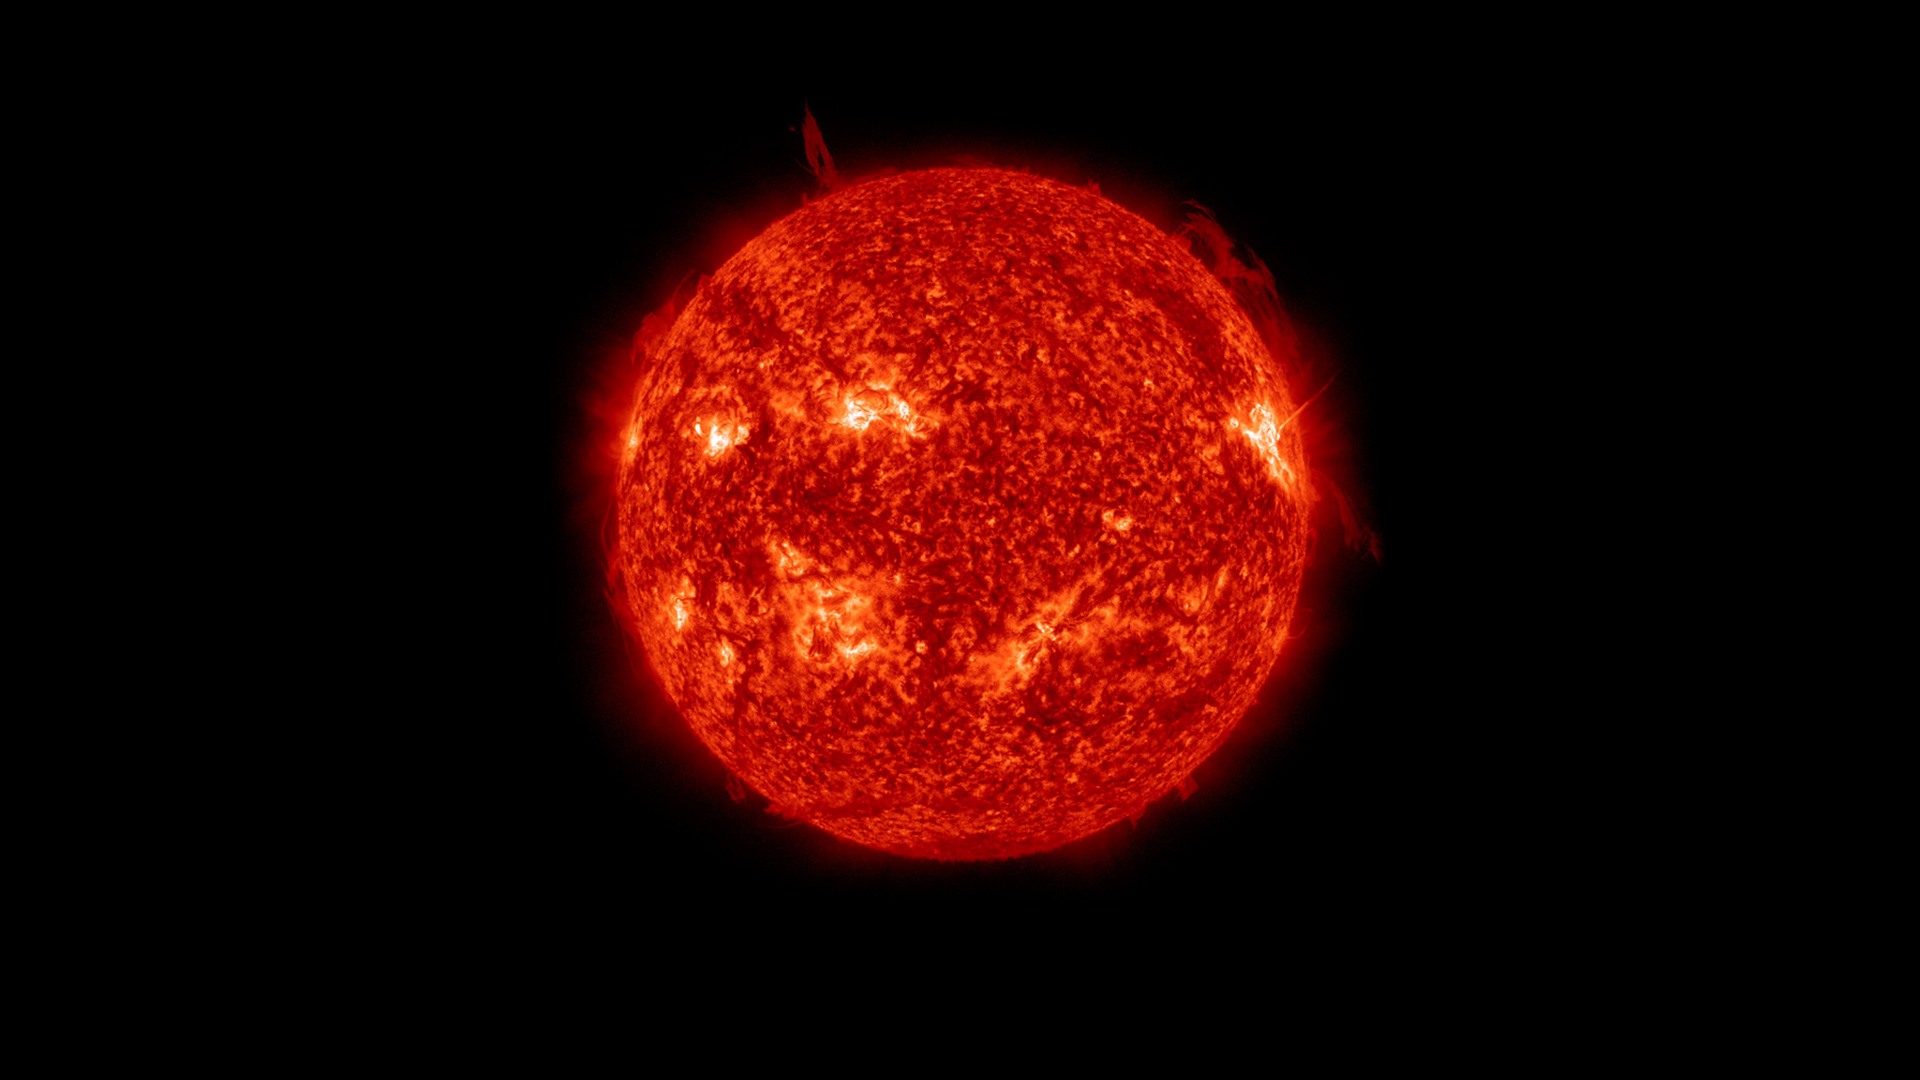 An image of the sun in space. It appears as a deep red/orange sphere with bright regions and some wispy filaments reaching out into space.